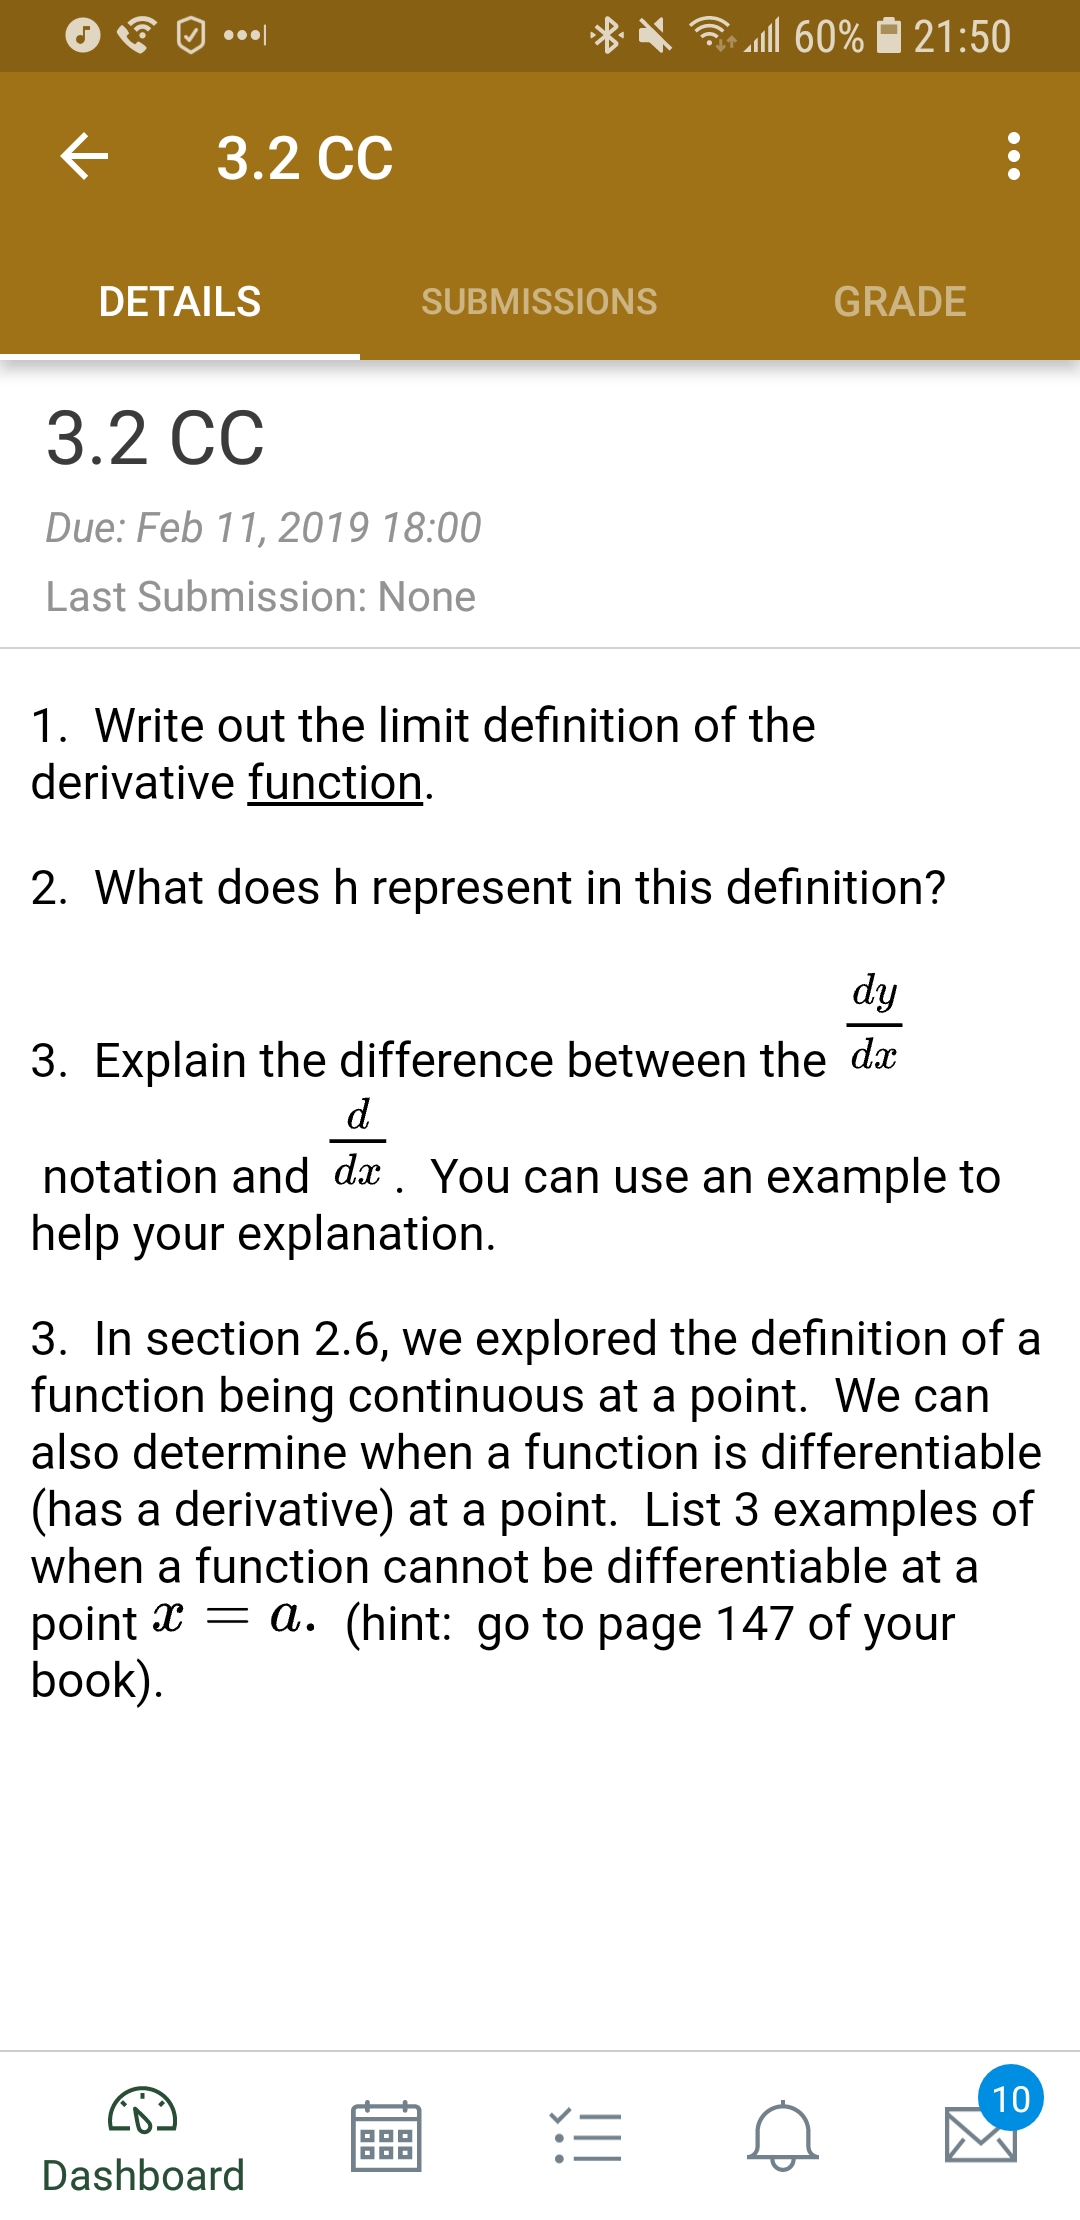 X .111 60% 21:50
< 3.2 cc
DETAILS
SUBMISSIONS
GRADE
3.2 CC
Due: Feb 11, 2019 18:00
Last Submission: None
1. Write out the limit definition of the
derivative function
2. What does h represent in this definition?
3. Explain the difference between the dx
notation and dx. You can use an example to
help your explanation
3. In section 2.6, we explored the definition of a
function being continuous at a point. We can
also determine when a function is differentiable
(has a derivative) at a point. List 3 examples of
when a function cannot be differentiable at a
point x - a. (hint: go to page 147 of your
book
Dashboard
